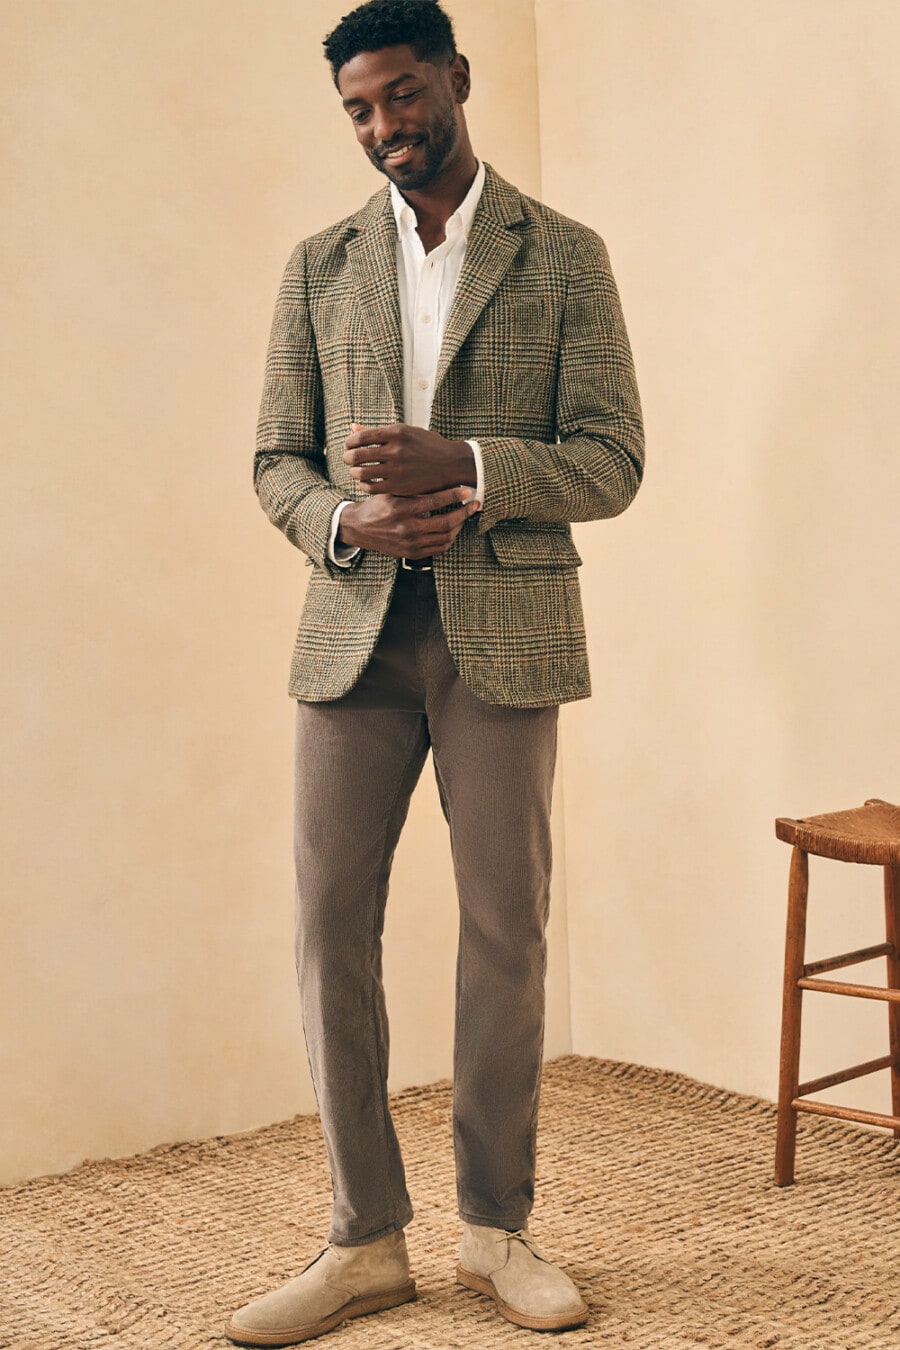 Men's grey chinos, white Oxford shirt, green check tweed blazer and beige suede desert boots business casual outfit